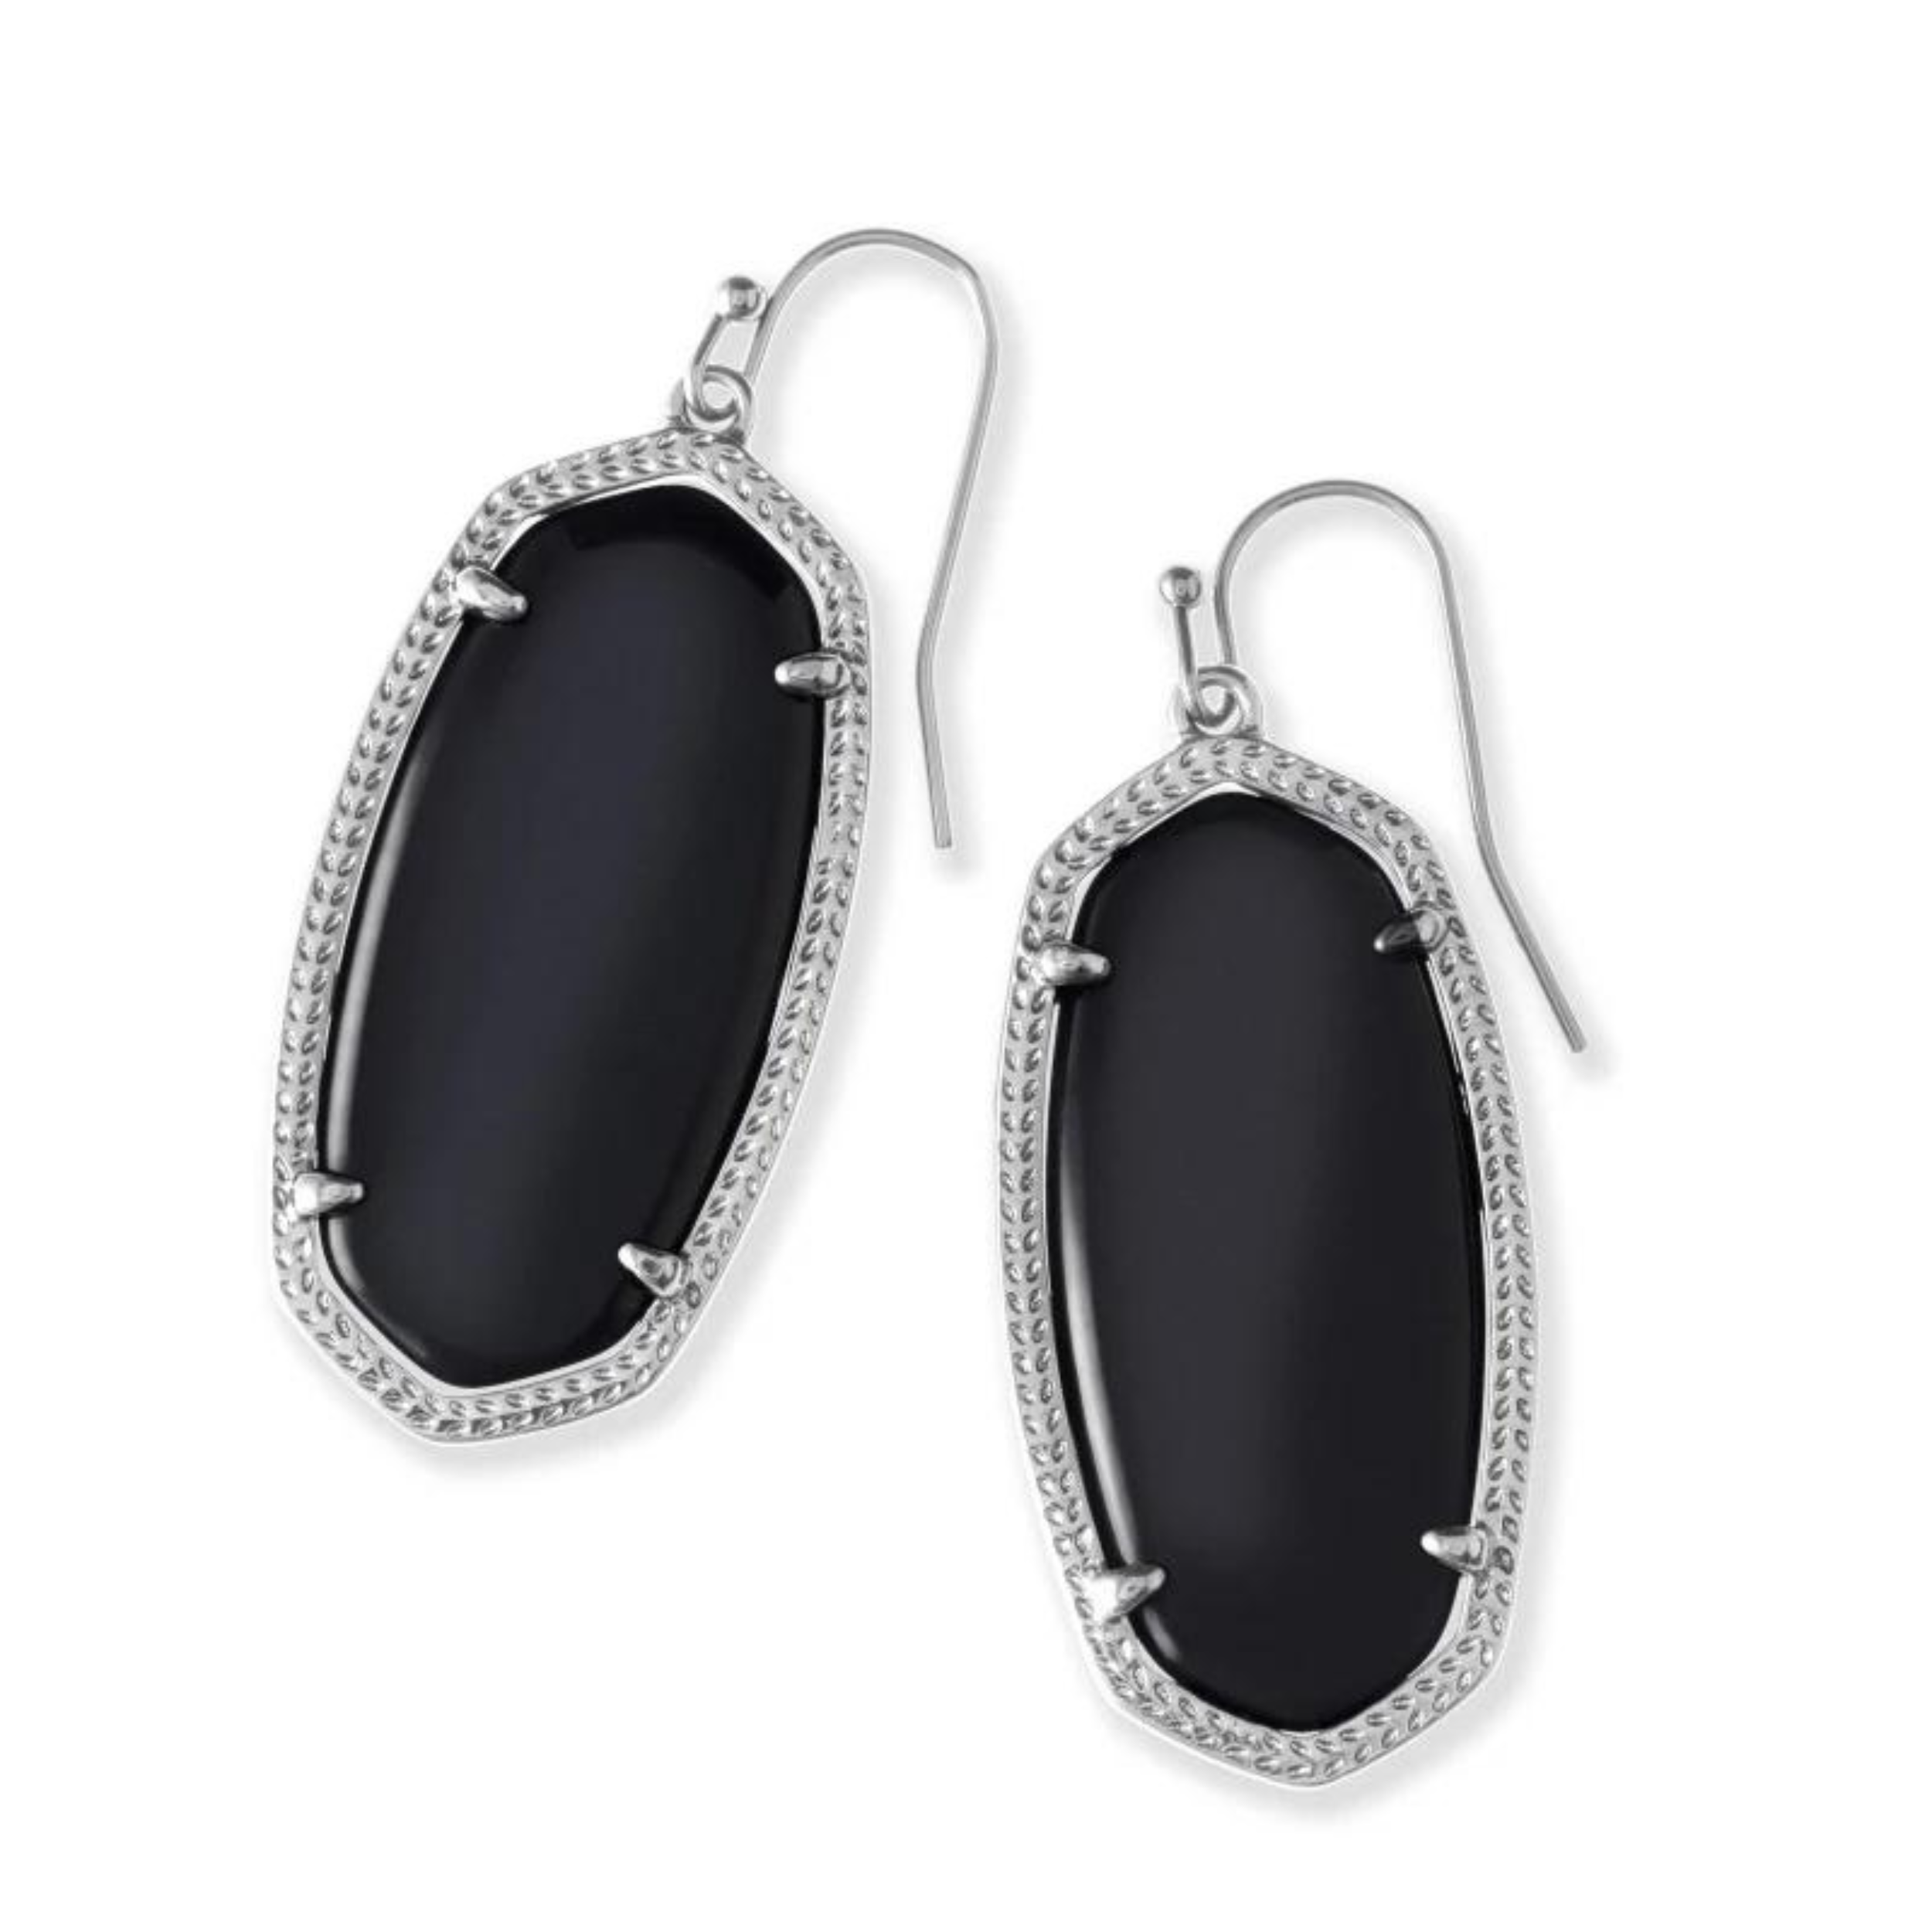 Silver drop earrings with black opaque stones, pictured on a white background.